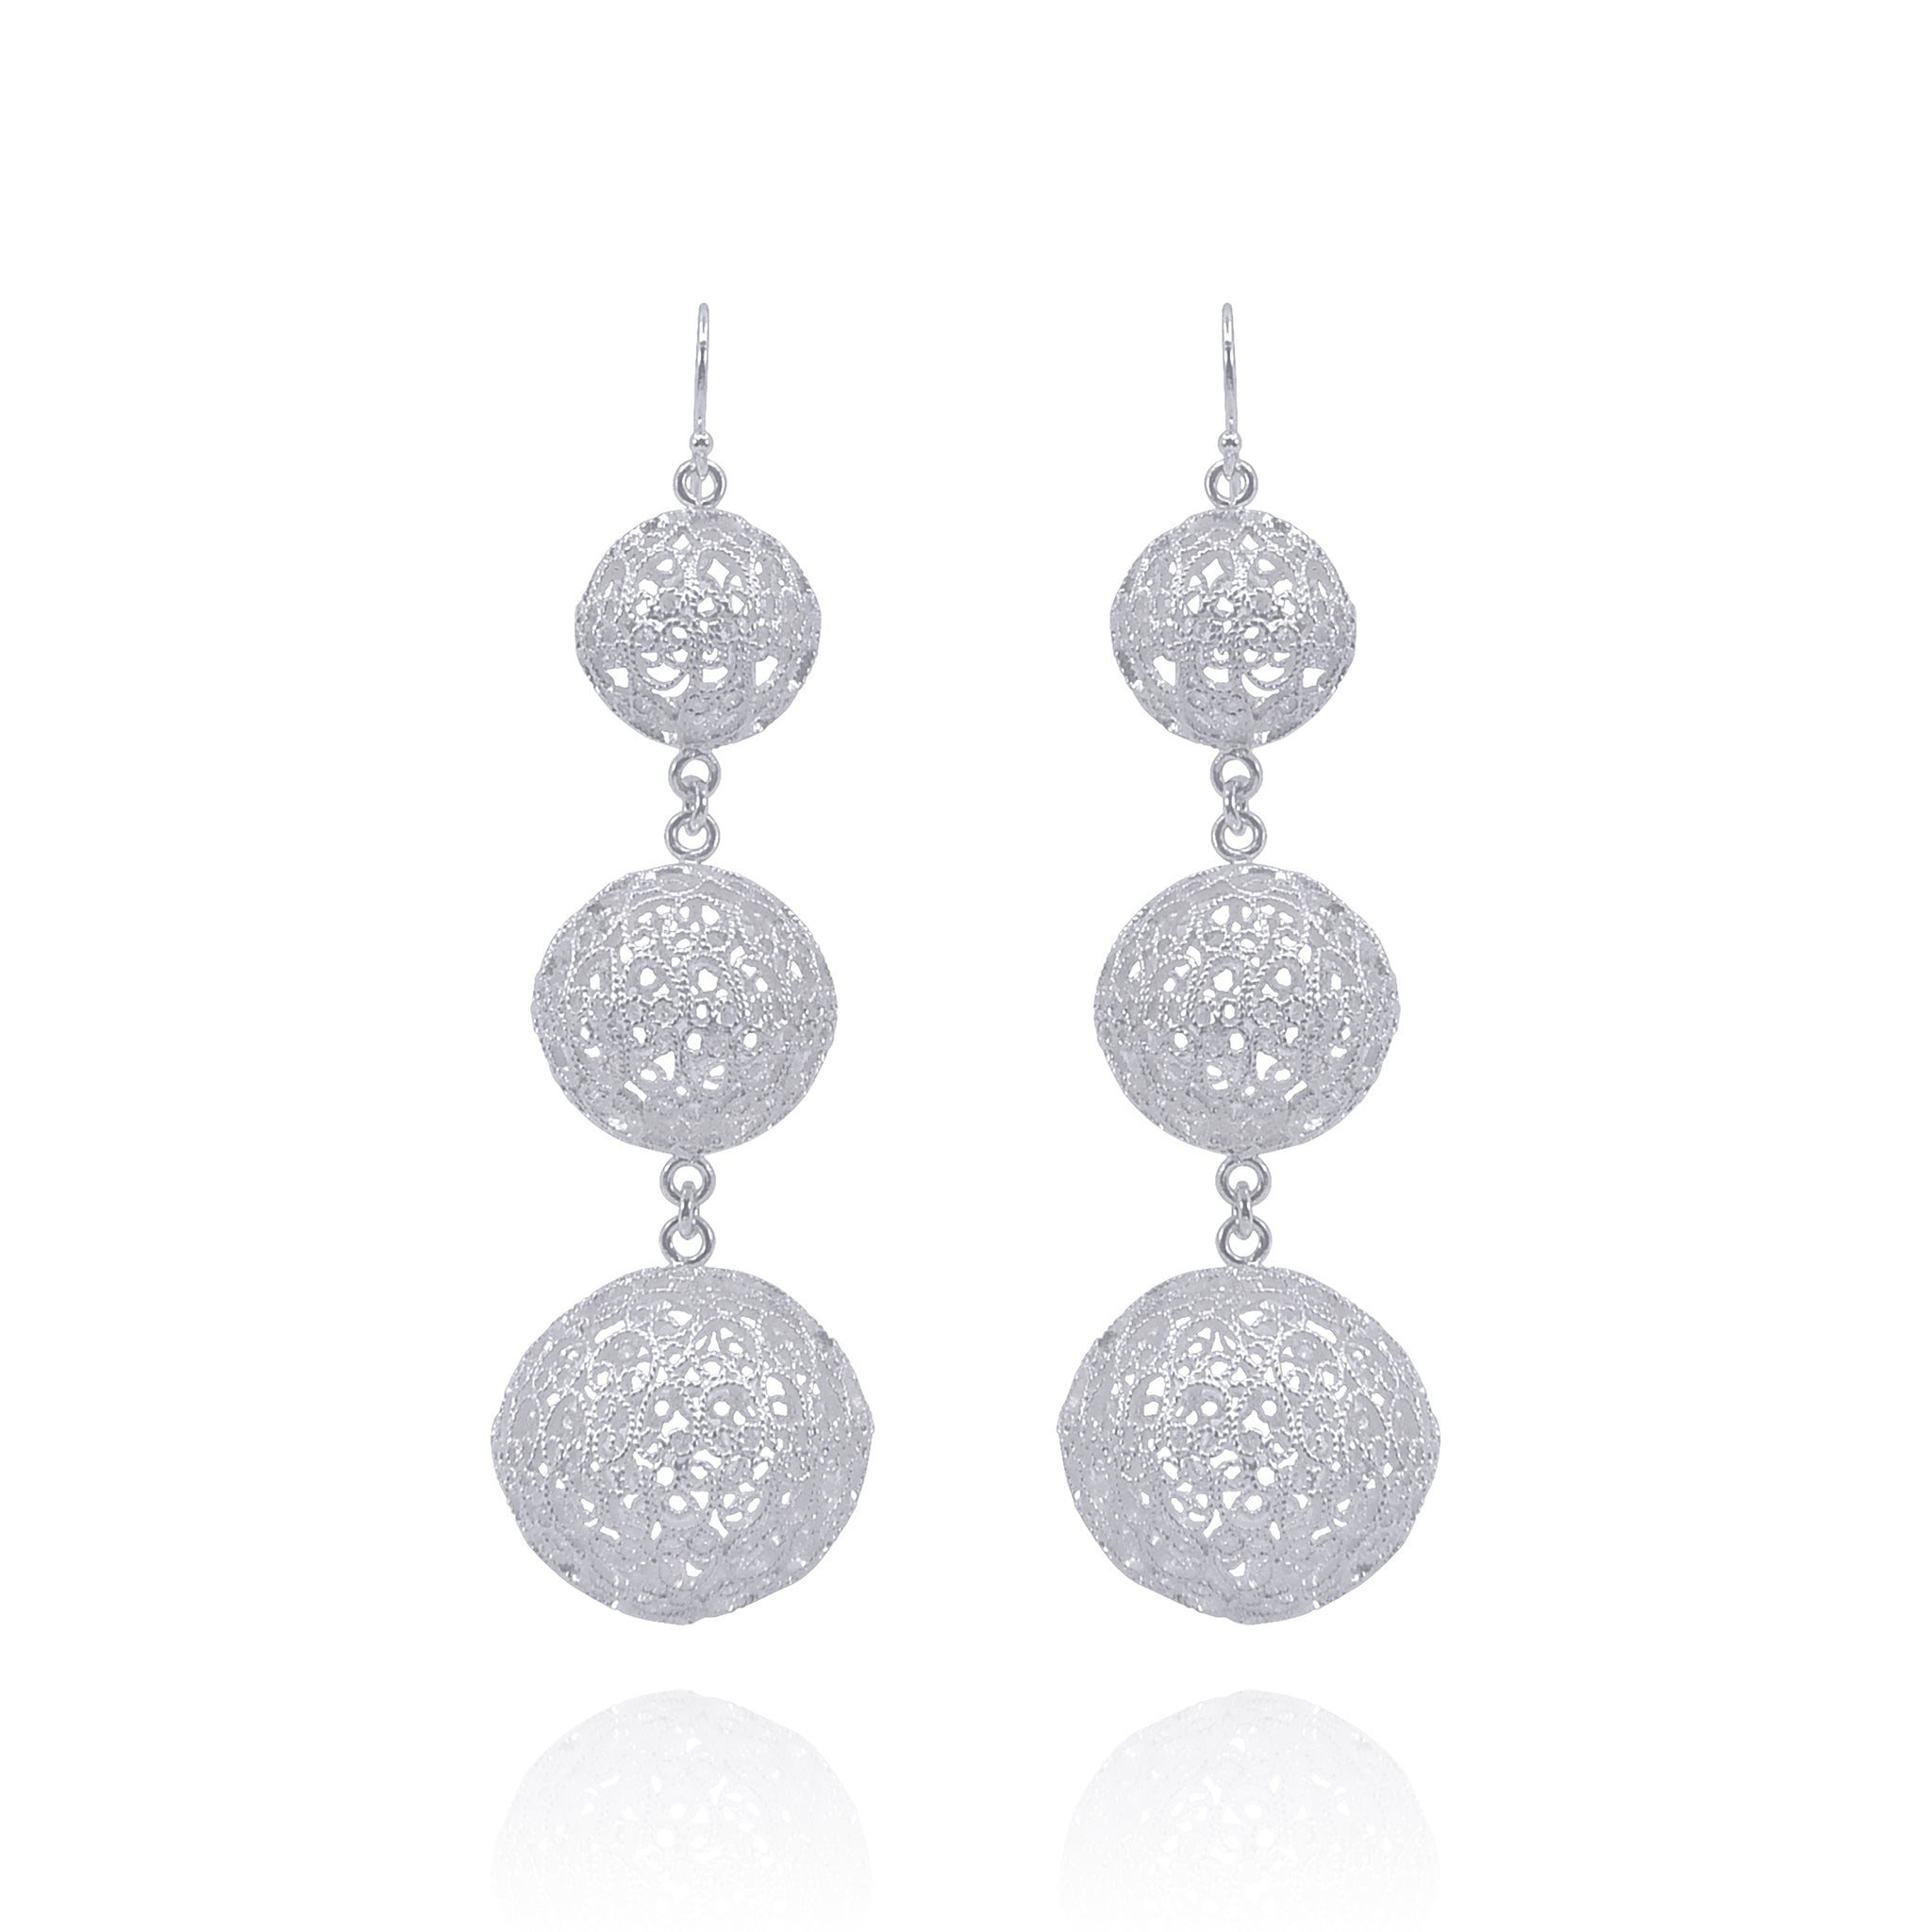 LUCRECIA SILVER LARGE STATEMENT EARRINGS FILIGREE